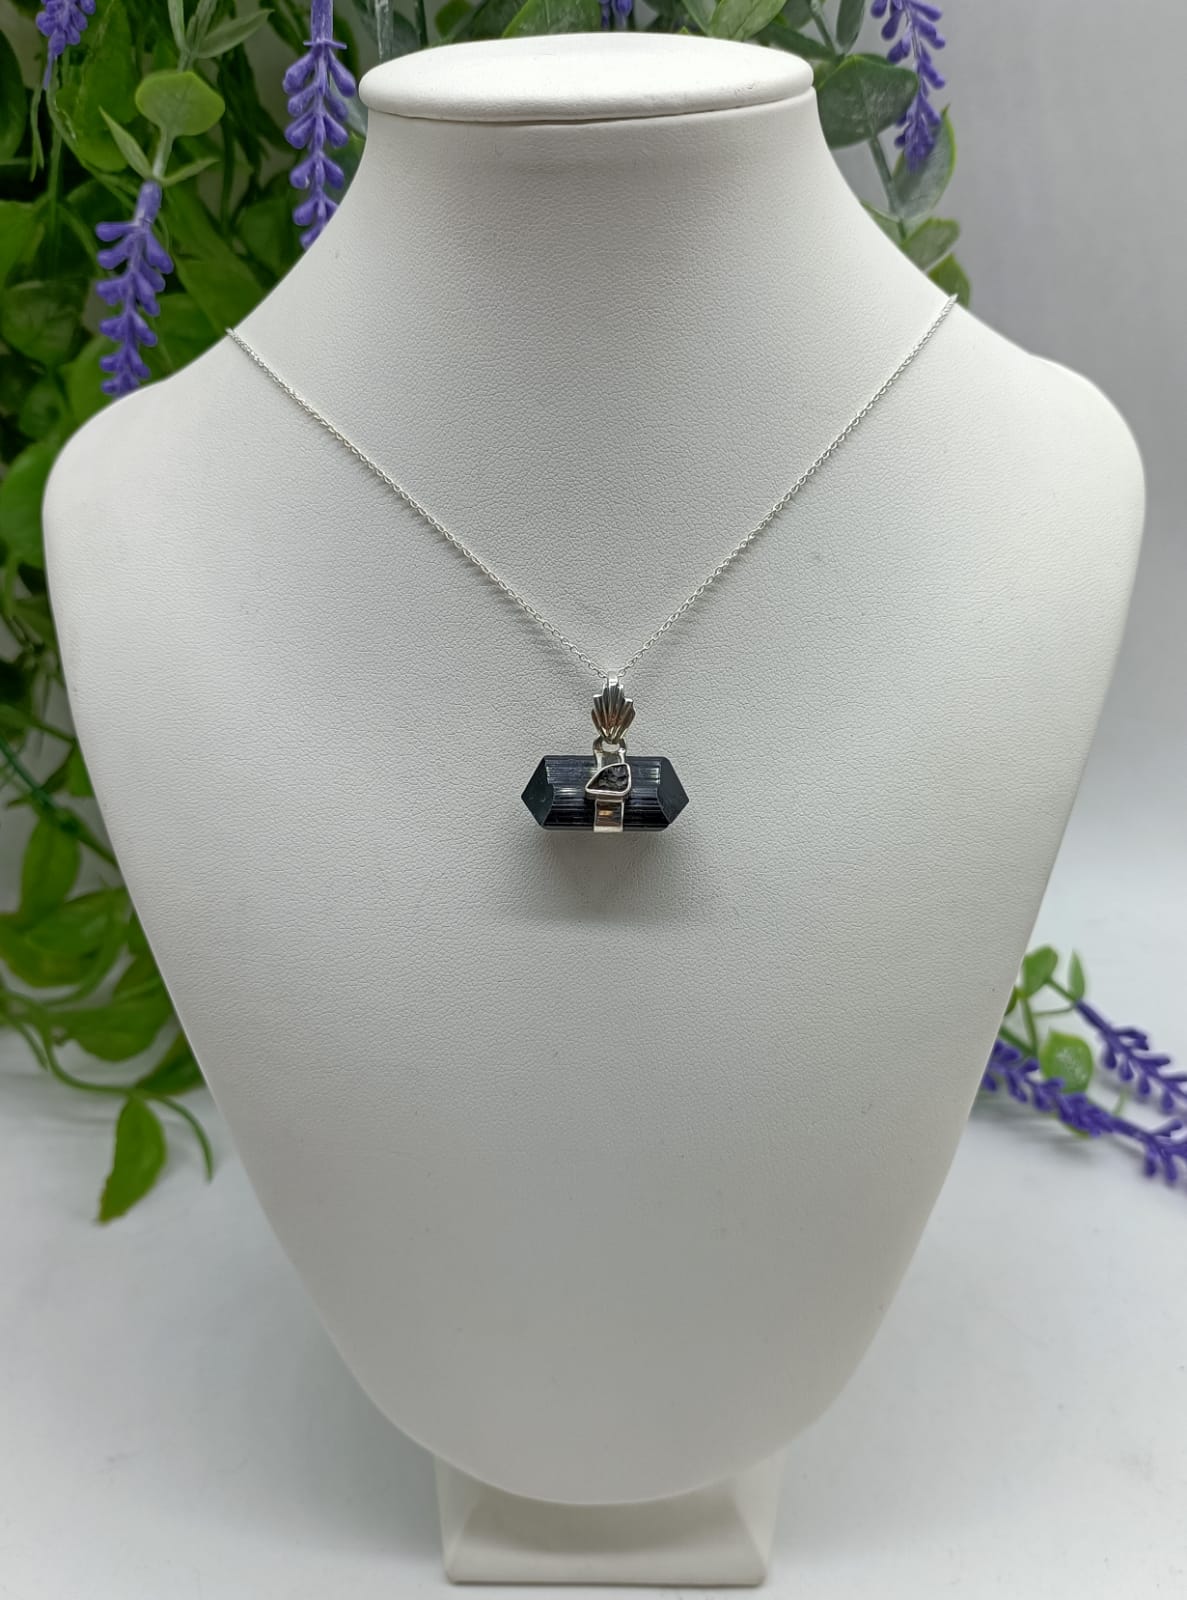 Authentic Moldavite with Black tourmaline in 925 Sterling Silver Pendant 24x11mm (Chain Included)
